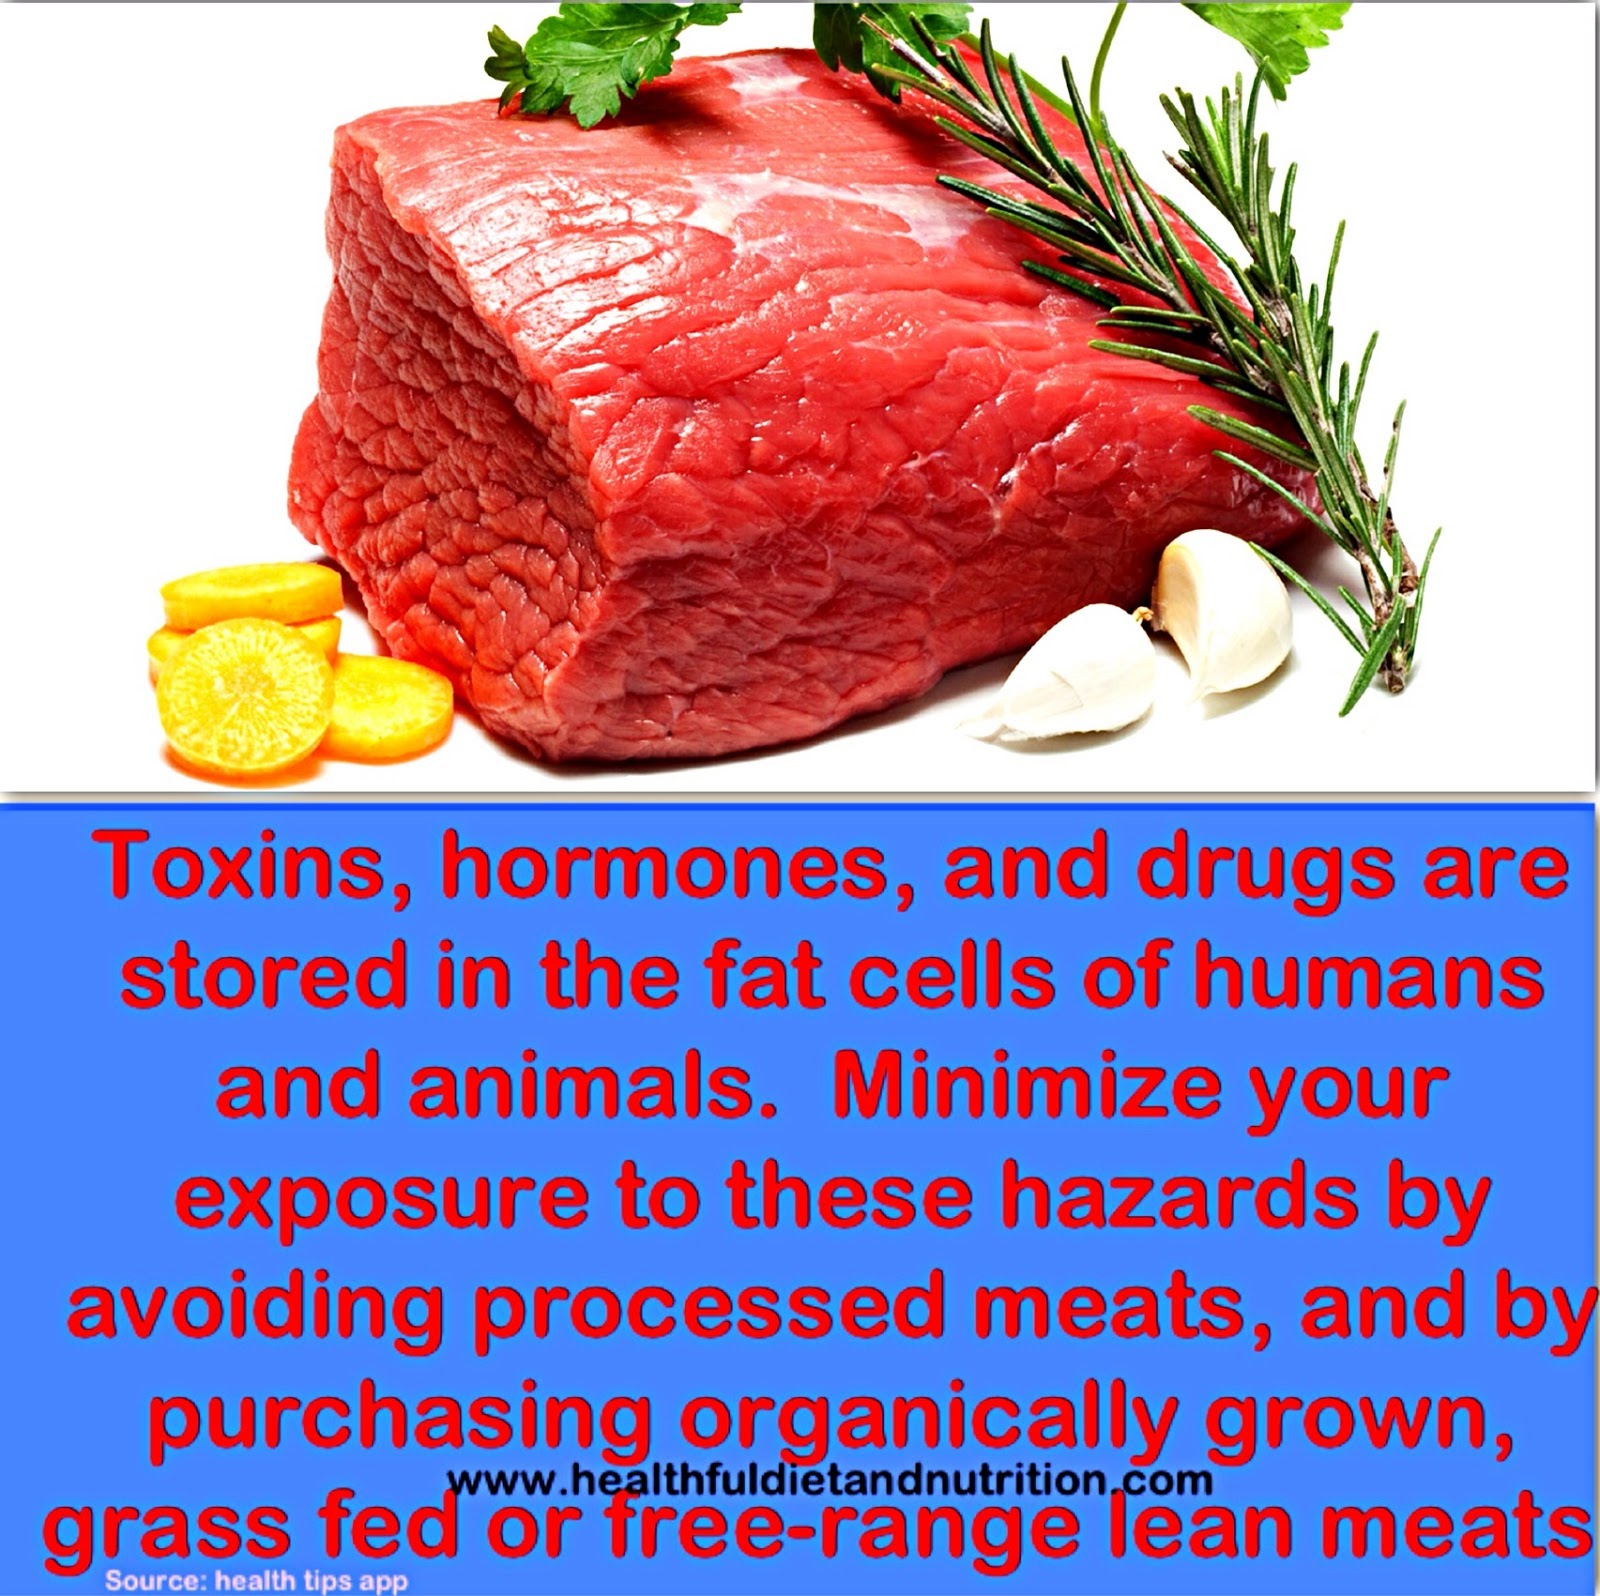 Consume Organically Grown Meat